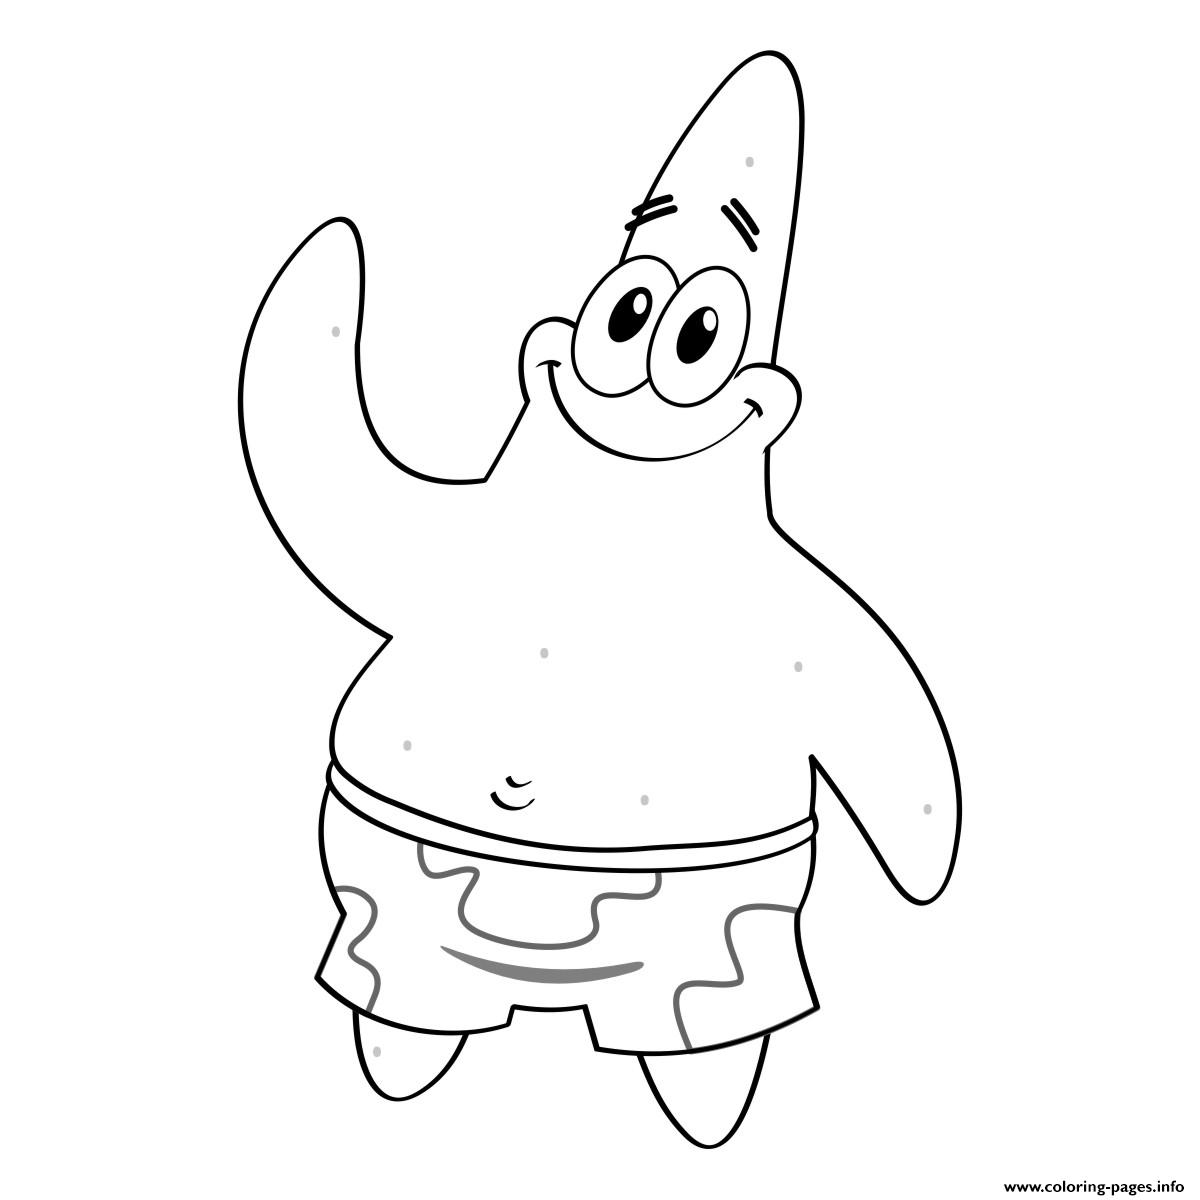 Patrick Mahomes Pages Coloring Pages1200 x 1200